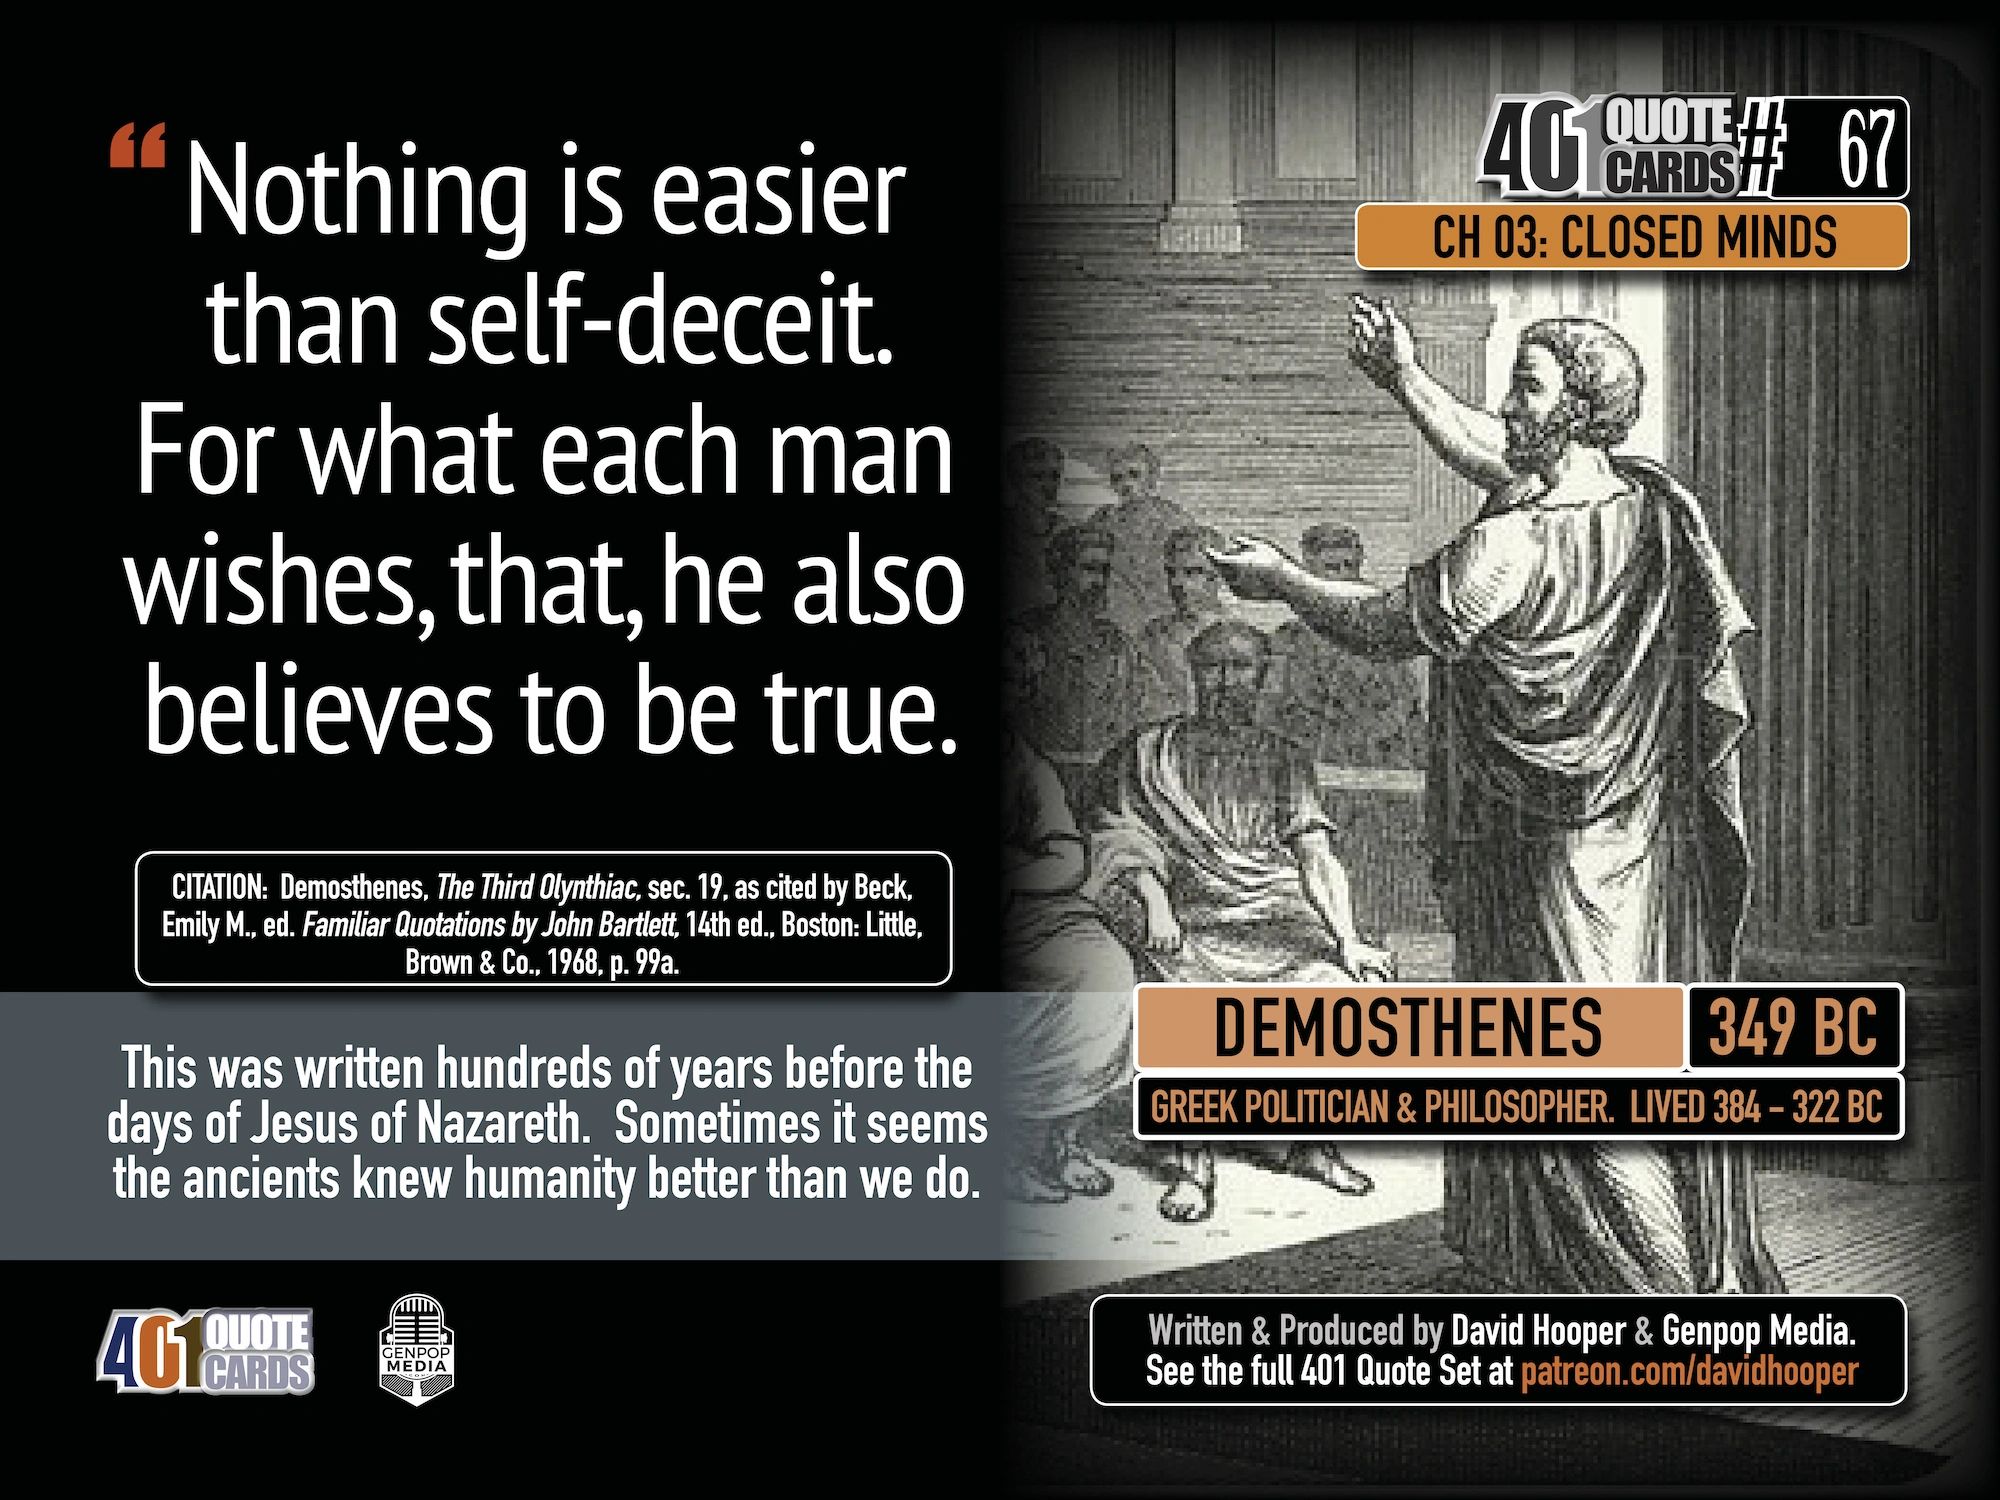 Demothenes Quote: "Nothing is easier than self-deceit..."  From The 401 Quote Card Series.